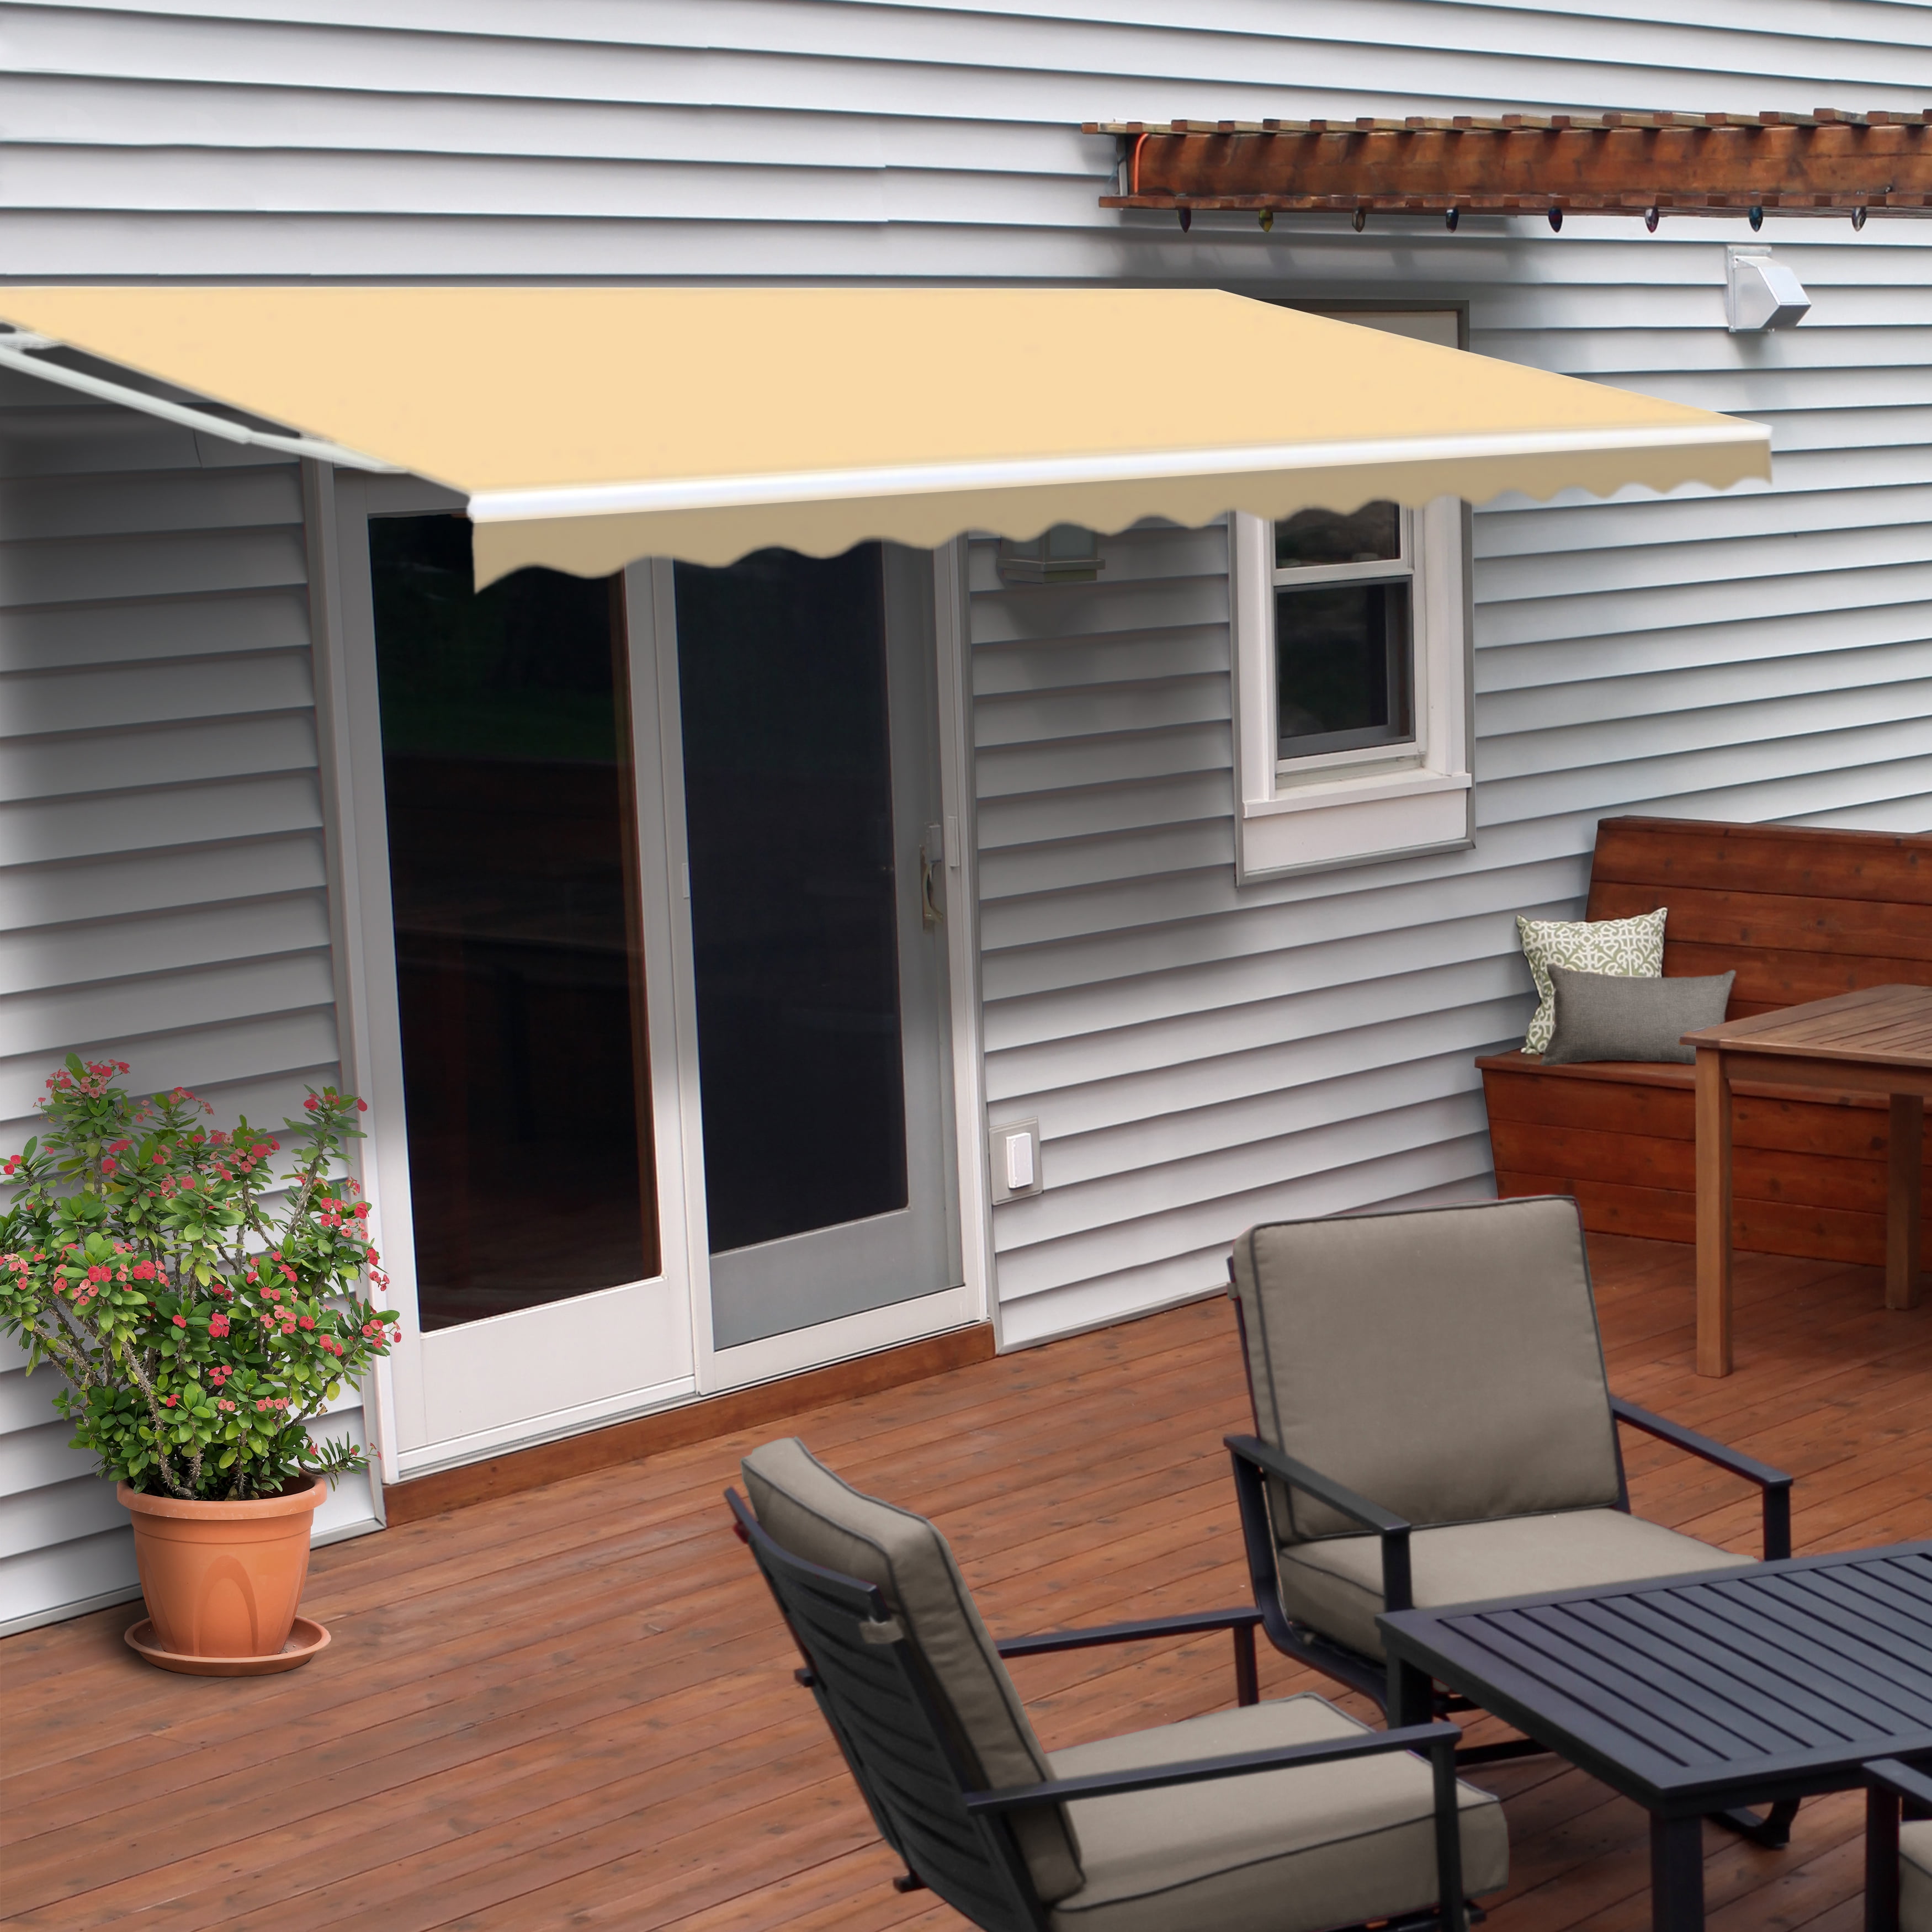 Details about   Patio Awning Manual Retractable Sun Shade Awning Outdoor Deck Canopy Shelter US 